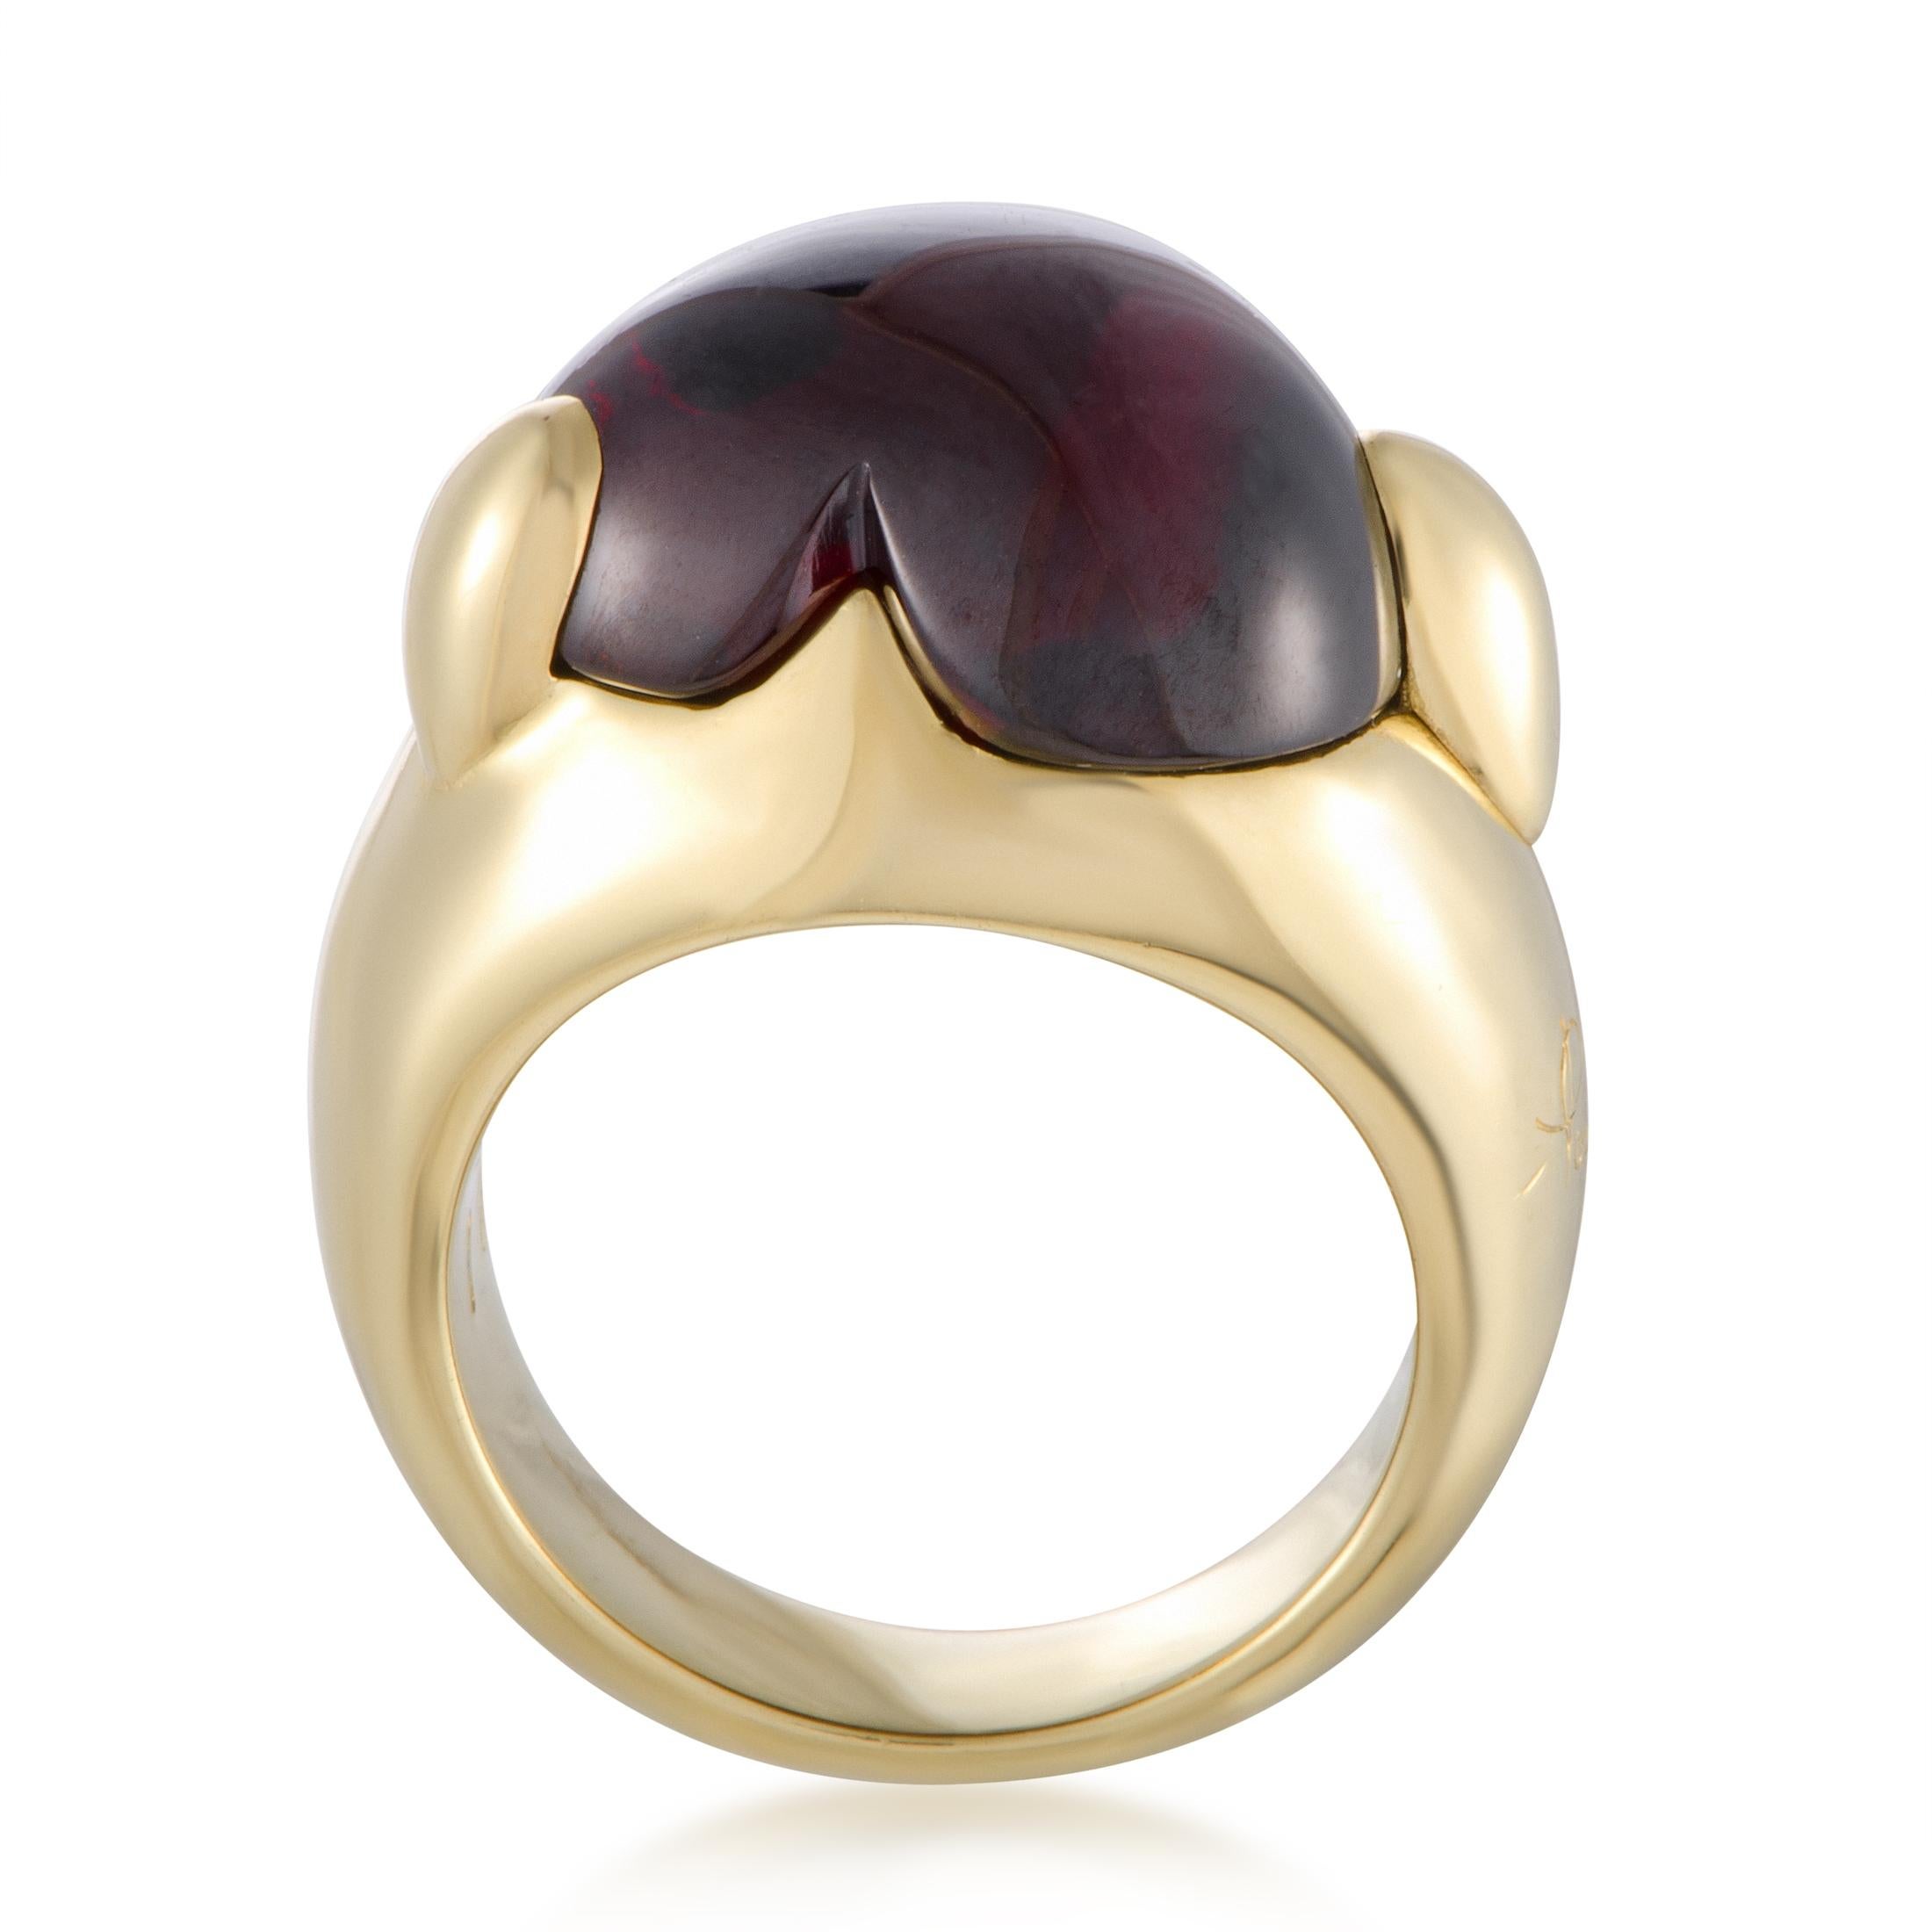 The compelling garnet is marvelously complemented by the luxuriously radiant 18K yellow gold in this stunning ring that offers a strikingly fashionable look. The ring is designed by Pomellato and weighs 20 grams.
Ring Top Dimensions: 16mm x 20mm